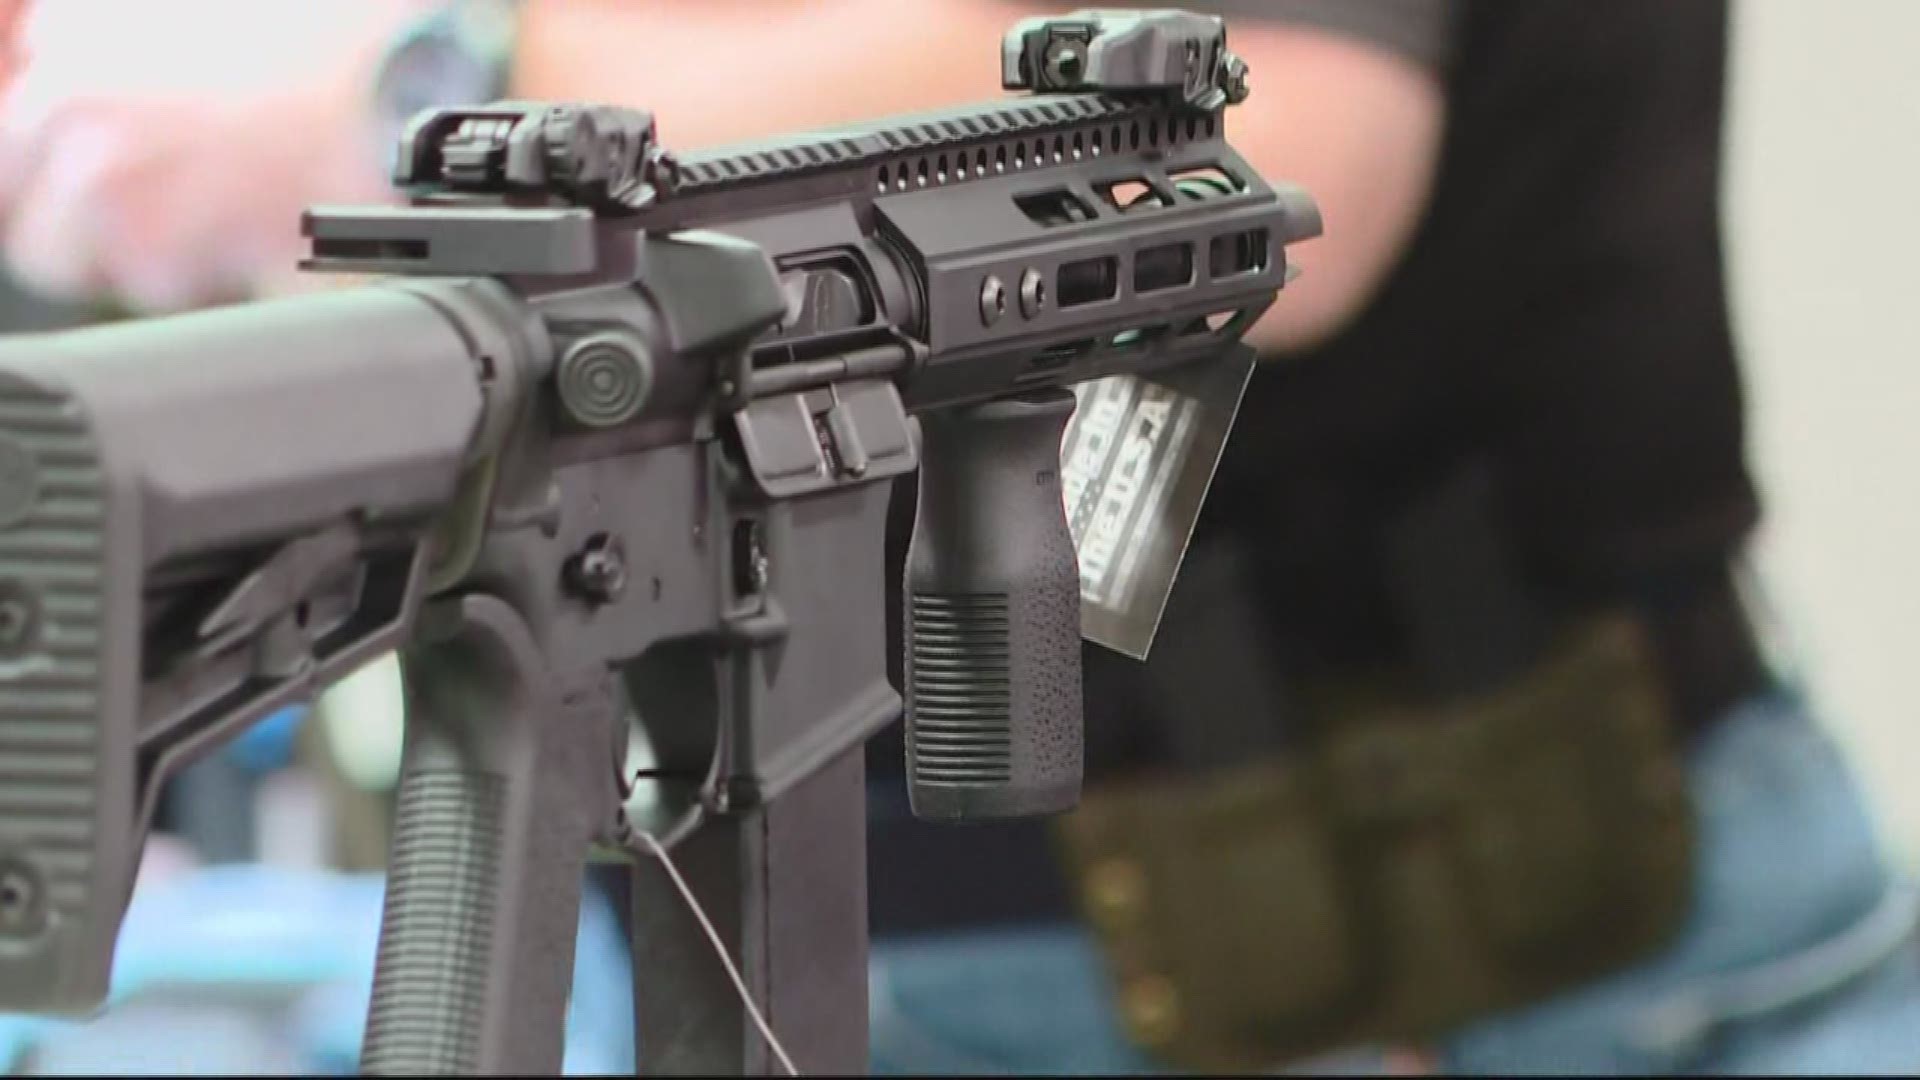 The 2020 session begins Wednesday, and Virginia’s Attorney General Mark Herring has made it clear that proposed gun laws will be enforced despite opposition.